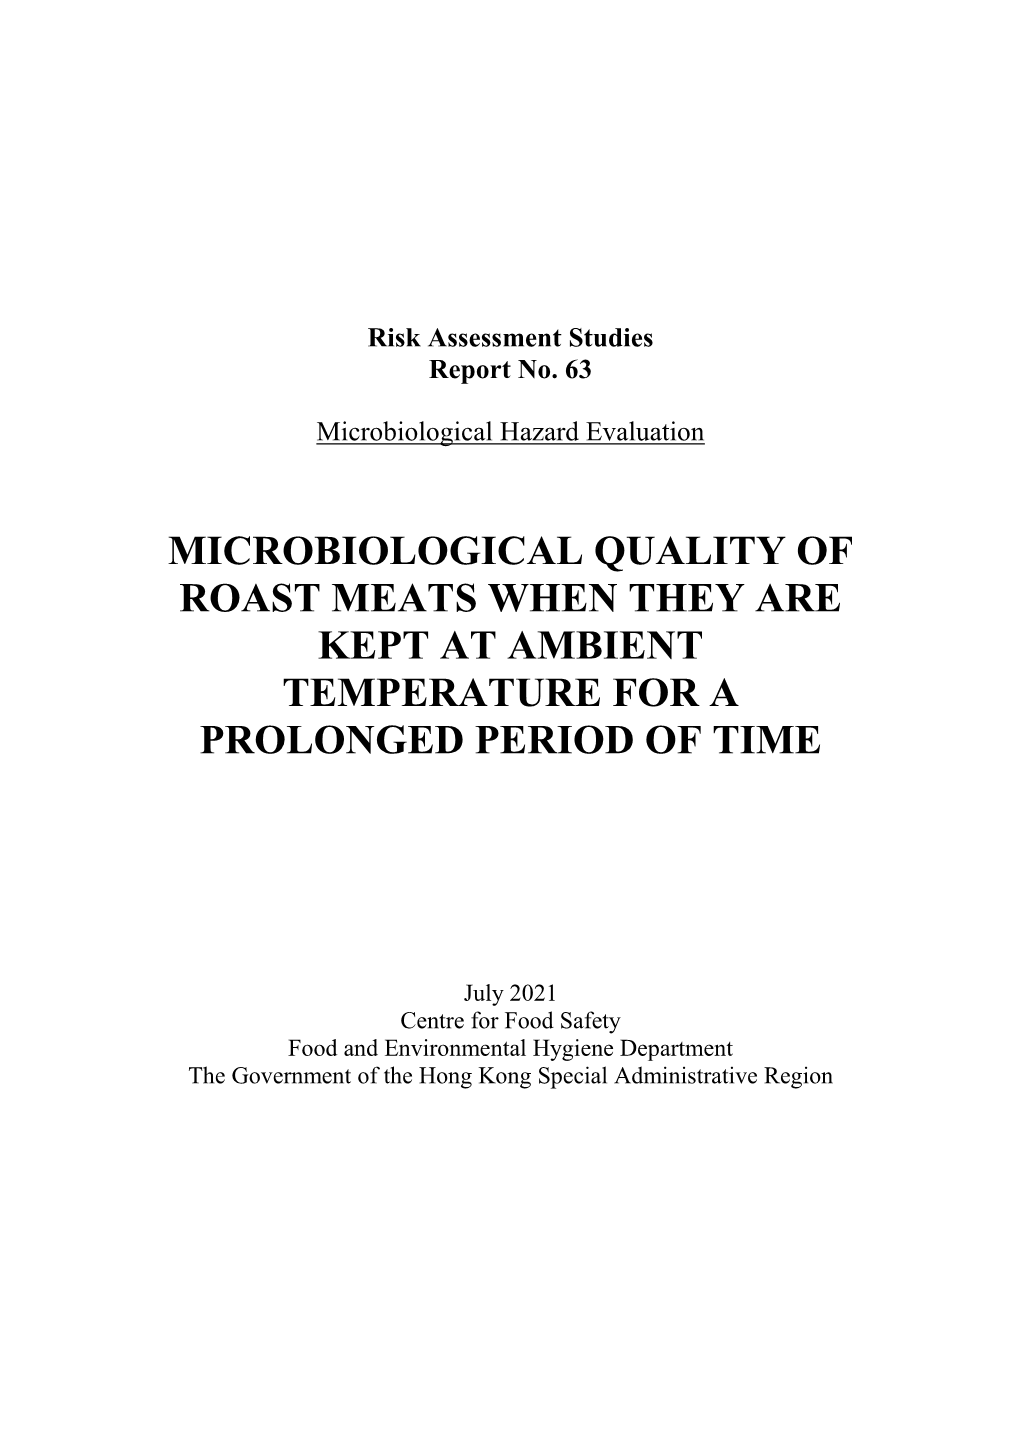 Microbiological Quality of Roast Meats When They Are Kept at Ambient Temperature for a Prolonged Period of Time